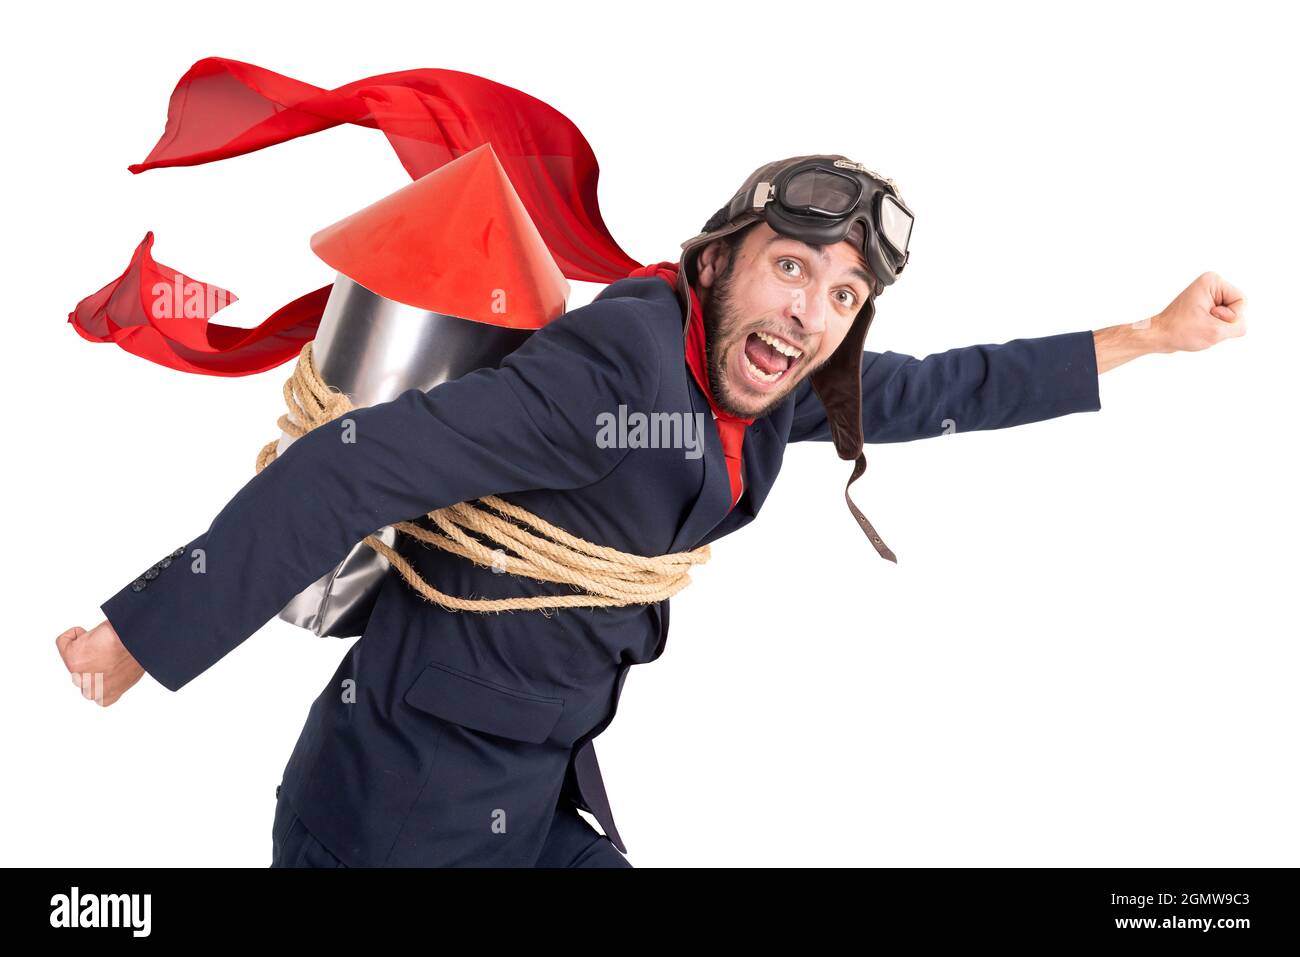 Businessman with homemade rocket and googles ready for a challenge Stock Photo